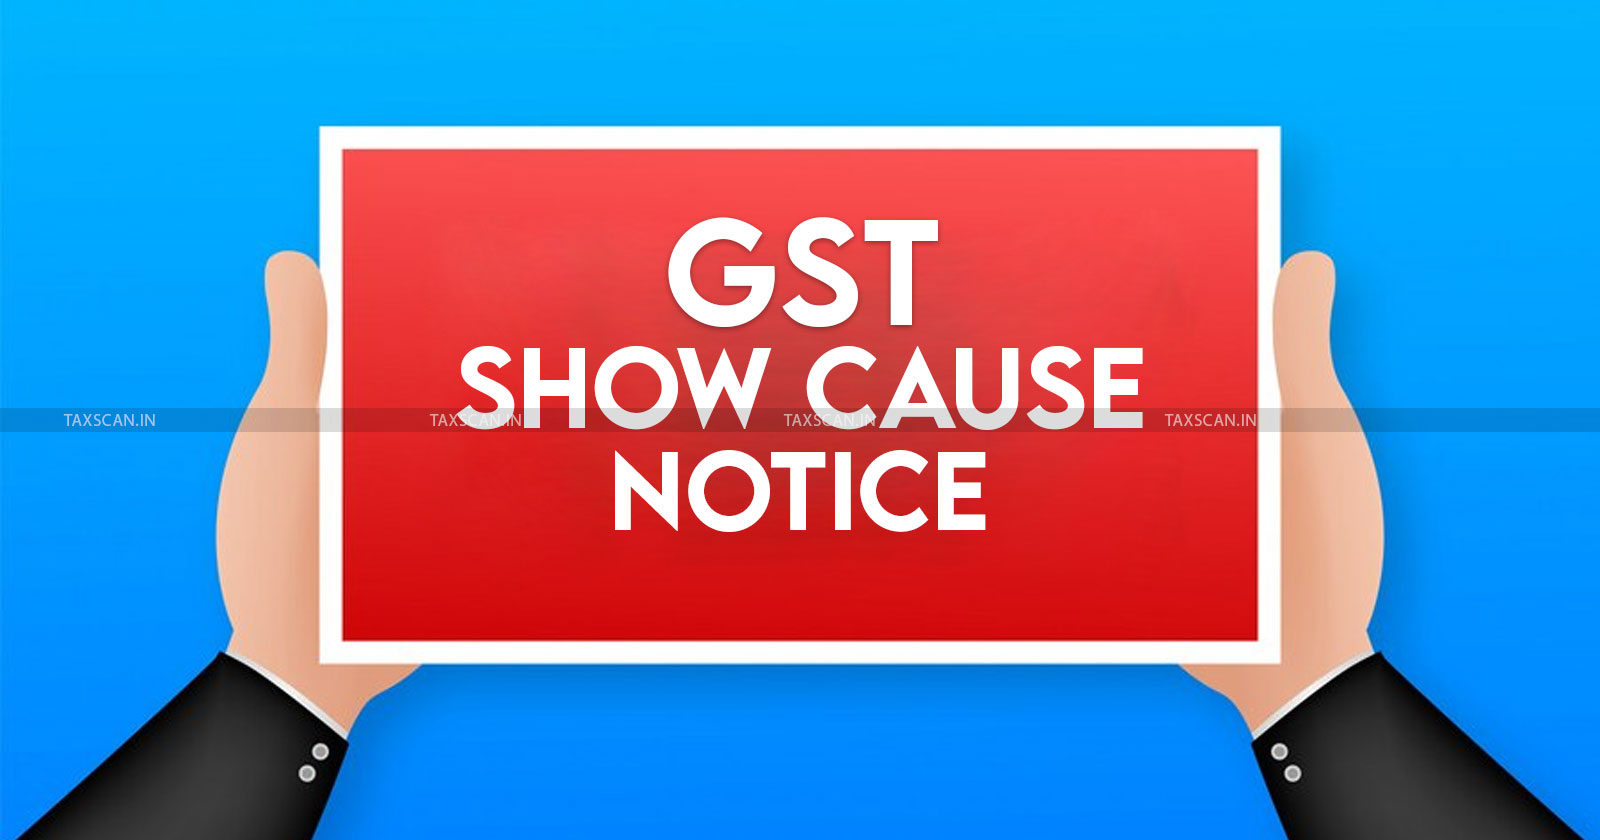 GST - Mutual Fund - Mutual Fund Houses - Show Cause Notice - TAXSCAN